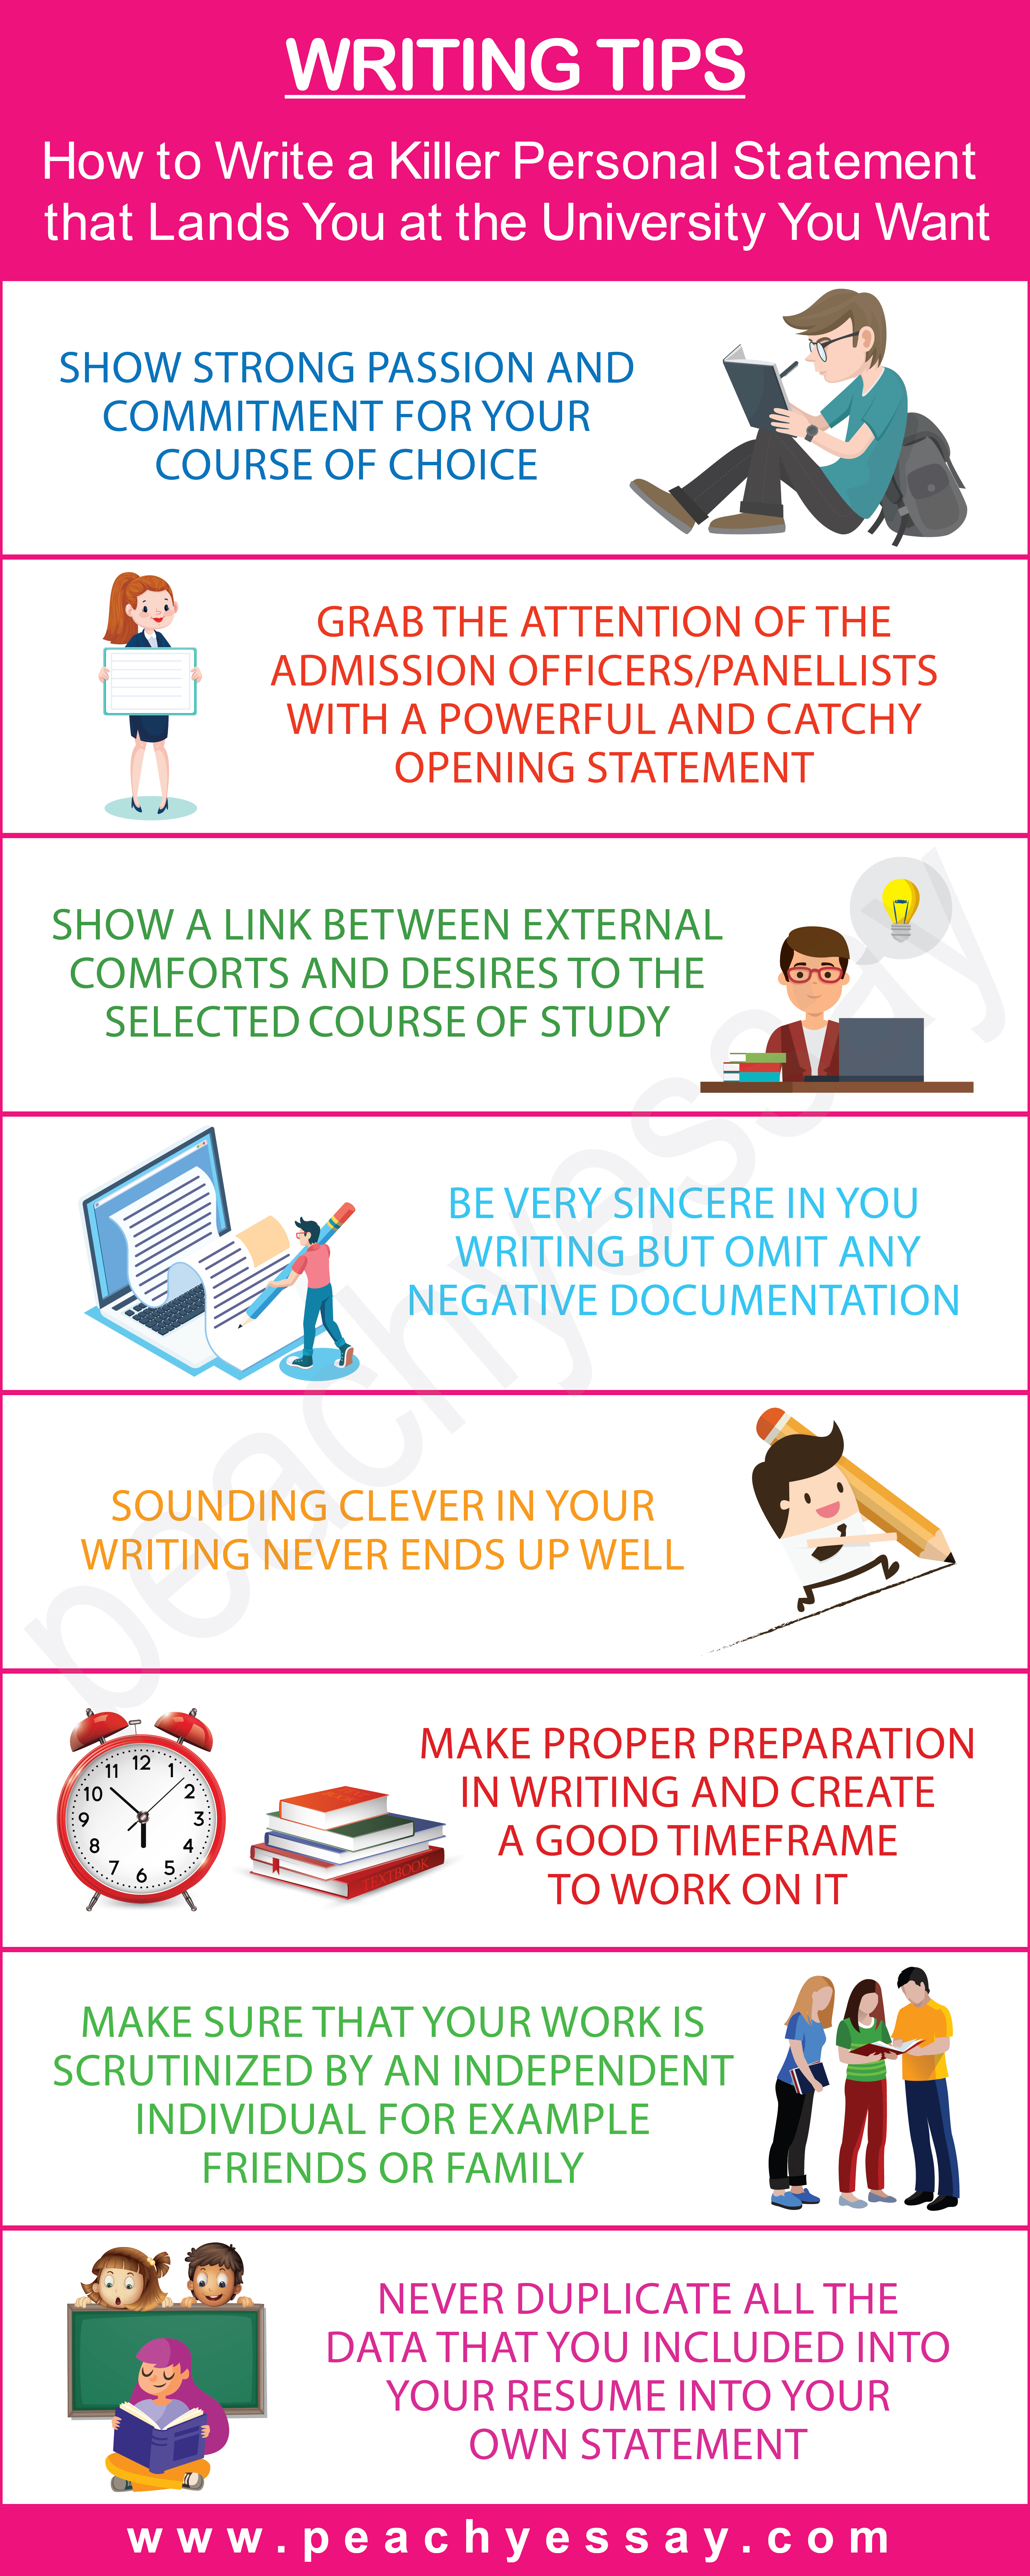 How to Write a Killer Personal Statement - Peachy Essay